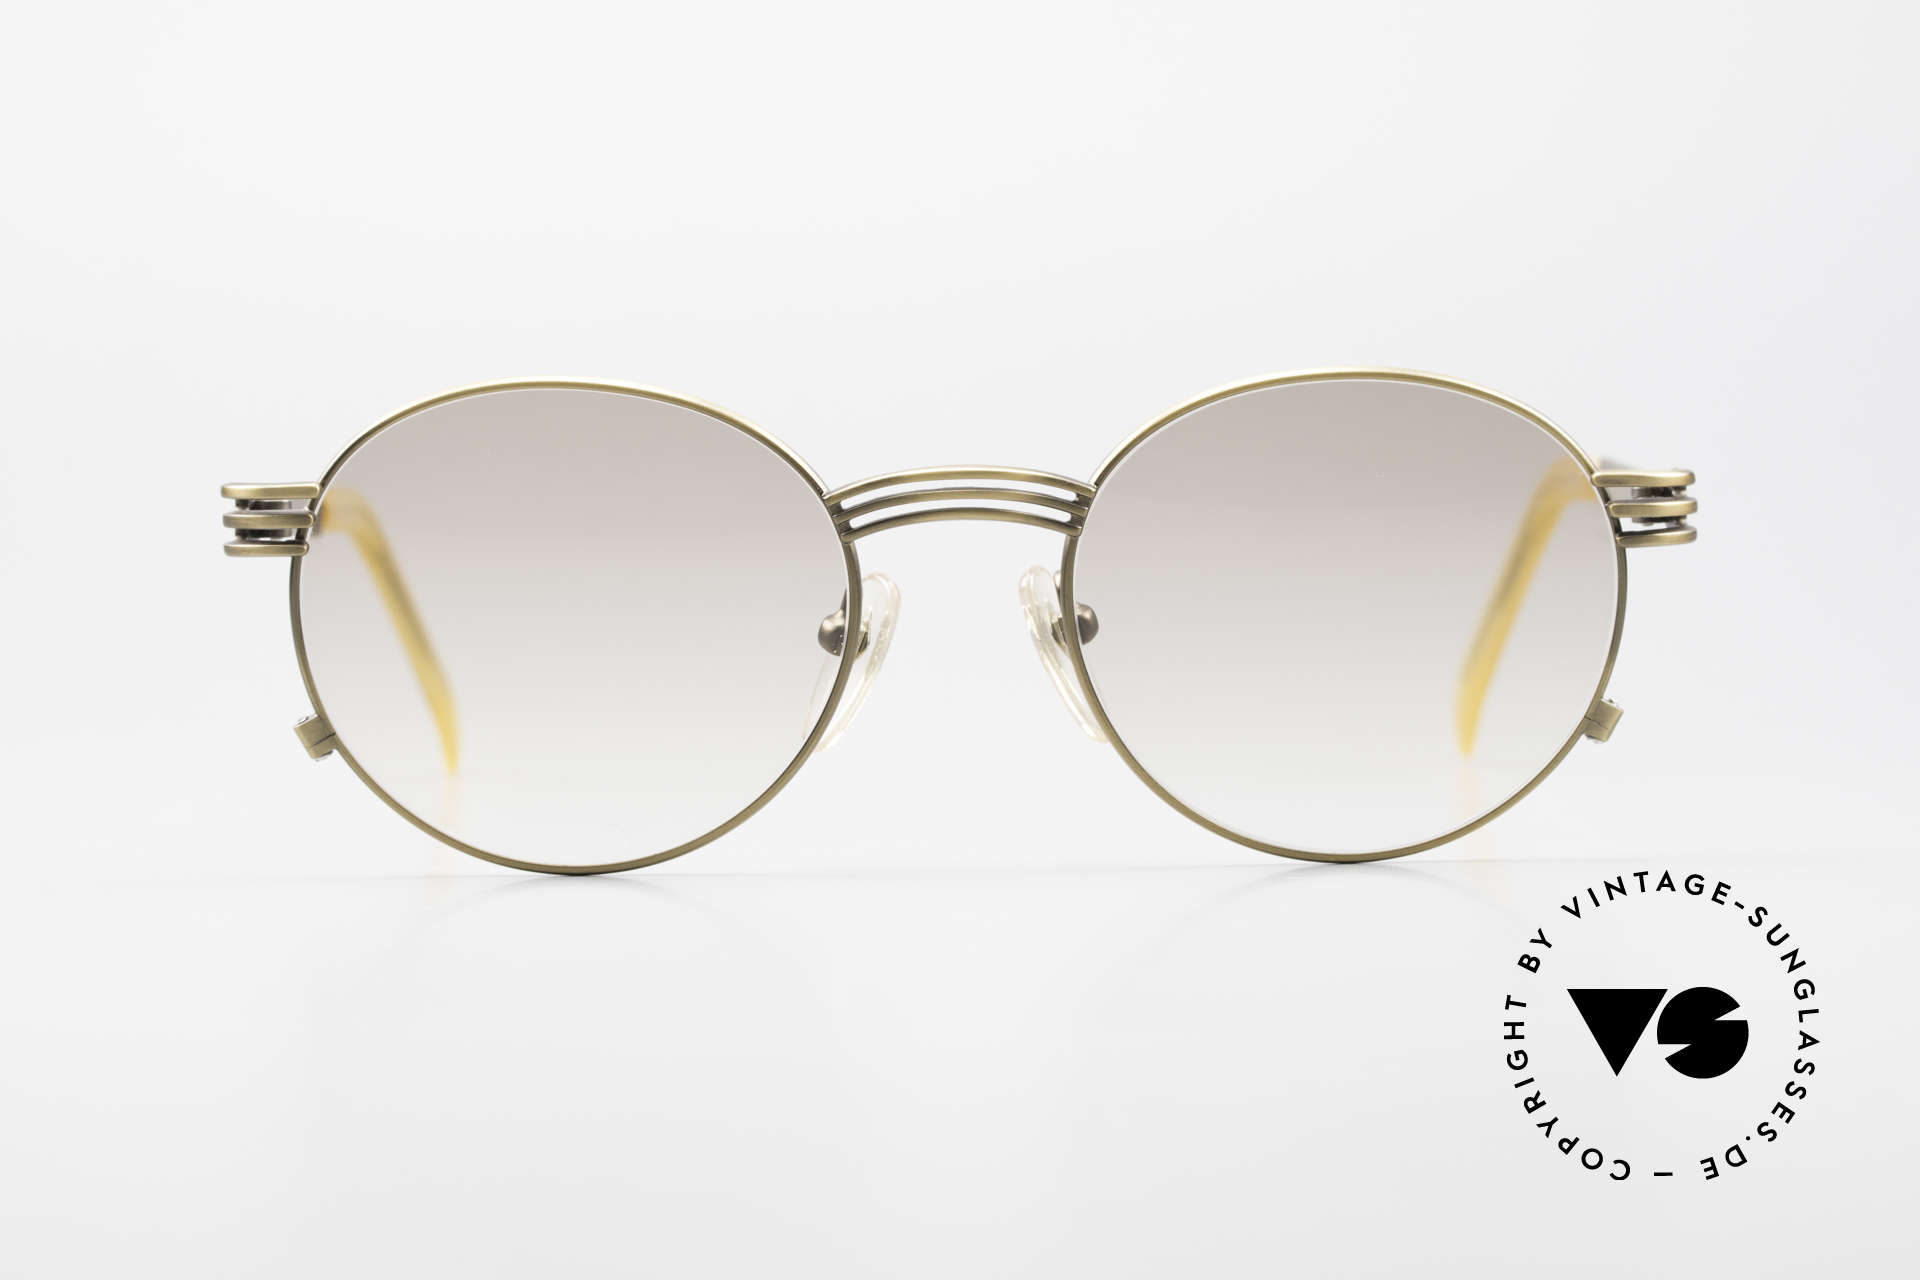 Jean Paul Gaultier 55-3174 Designer Vintage Glasses 90's, the temples are shaped like a fork (typically unique JPG), Made for Men and Women